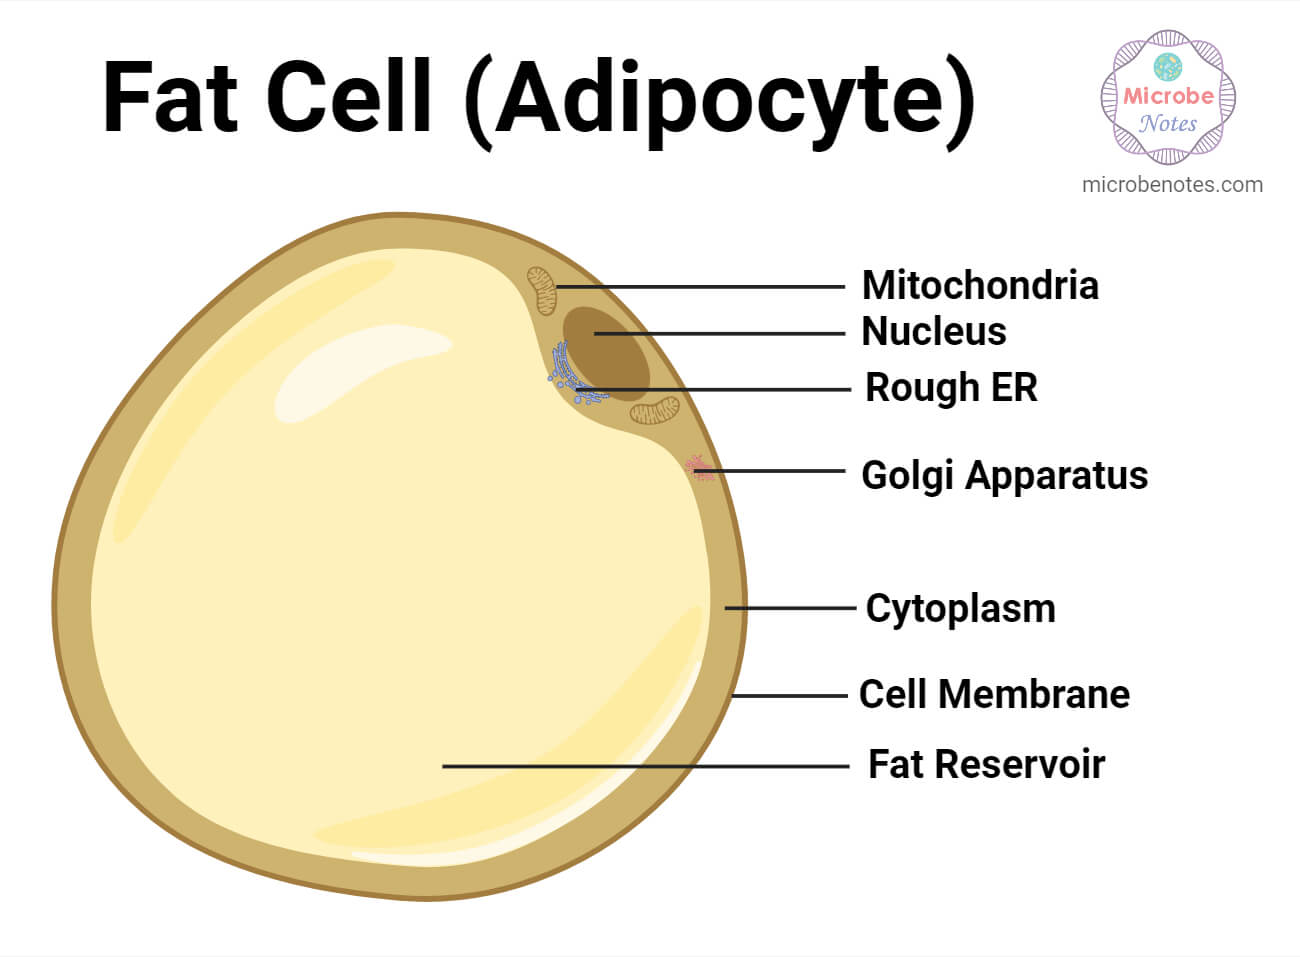 Structure of Fat Cell (Adipocyte)